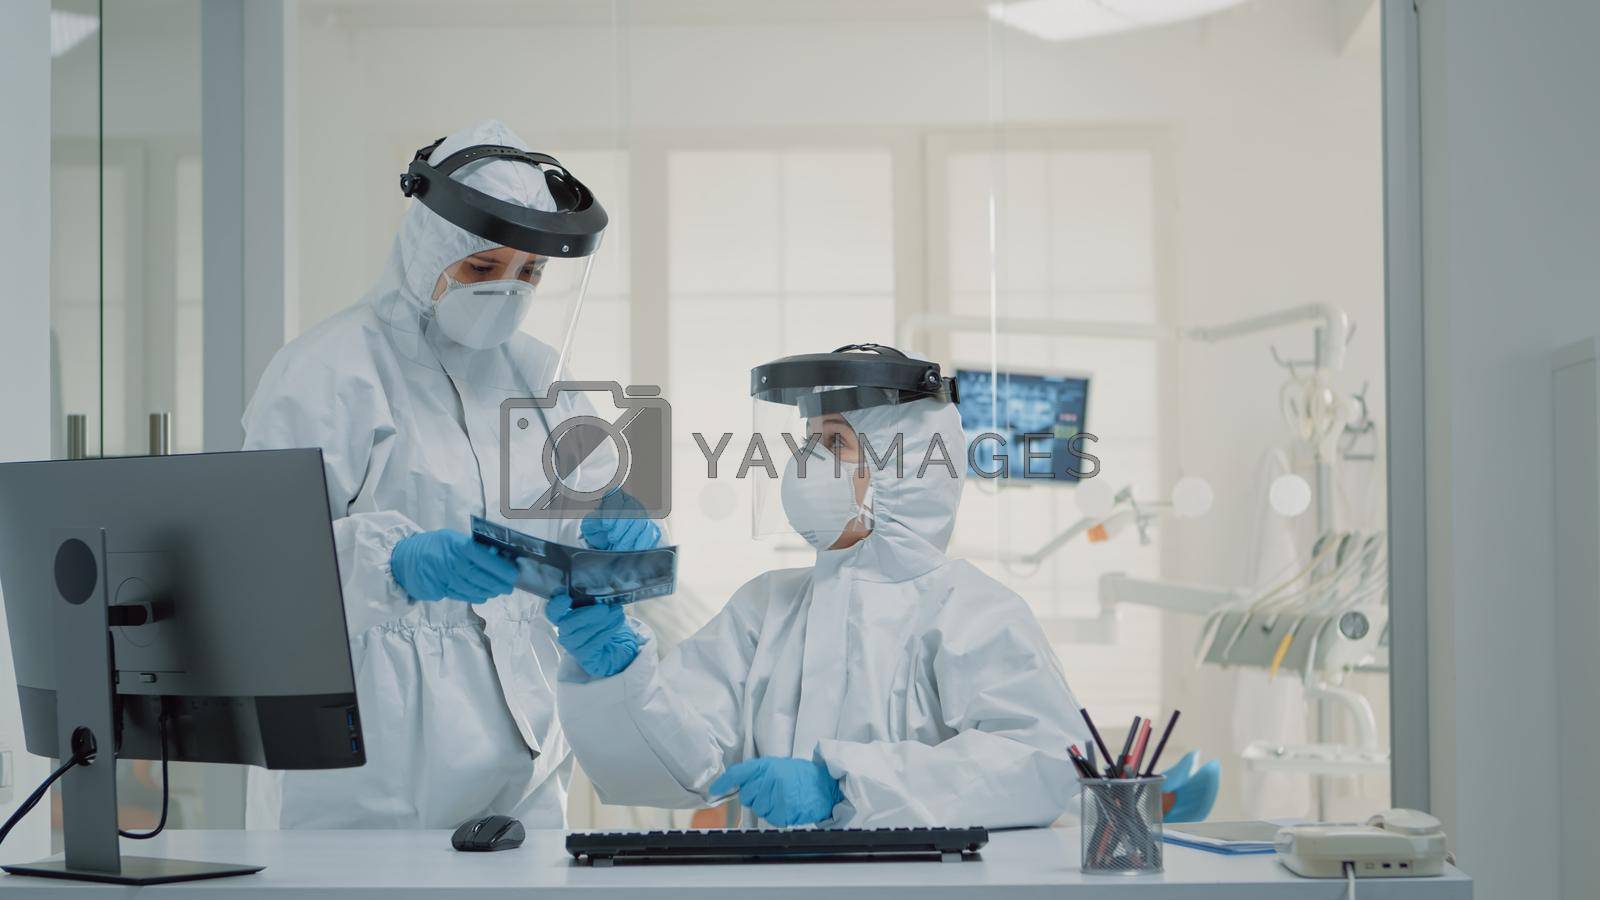 Medical stomatology staff working on teeth healthcare for patient at dental clinic, wearing protection suits. Nurse using modern computer at desk while dentist holding x ray for implant